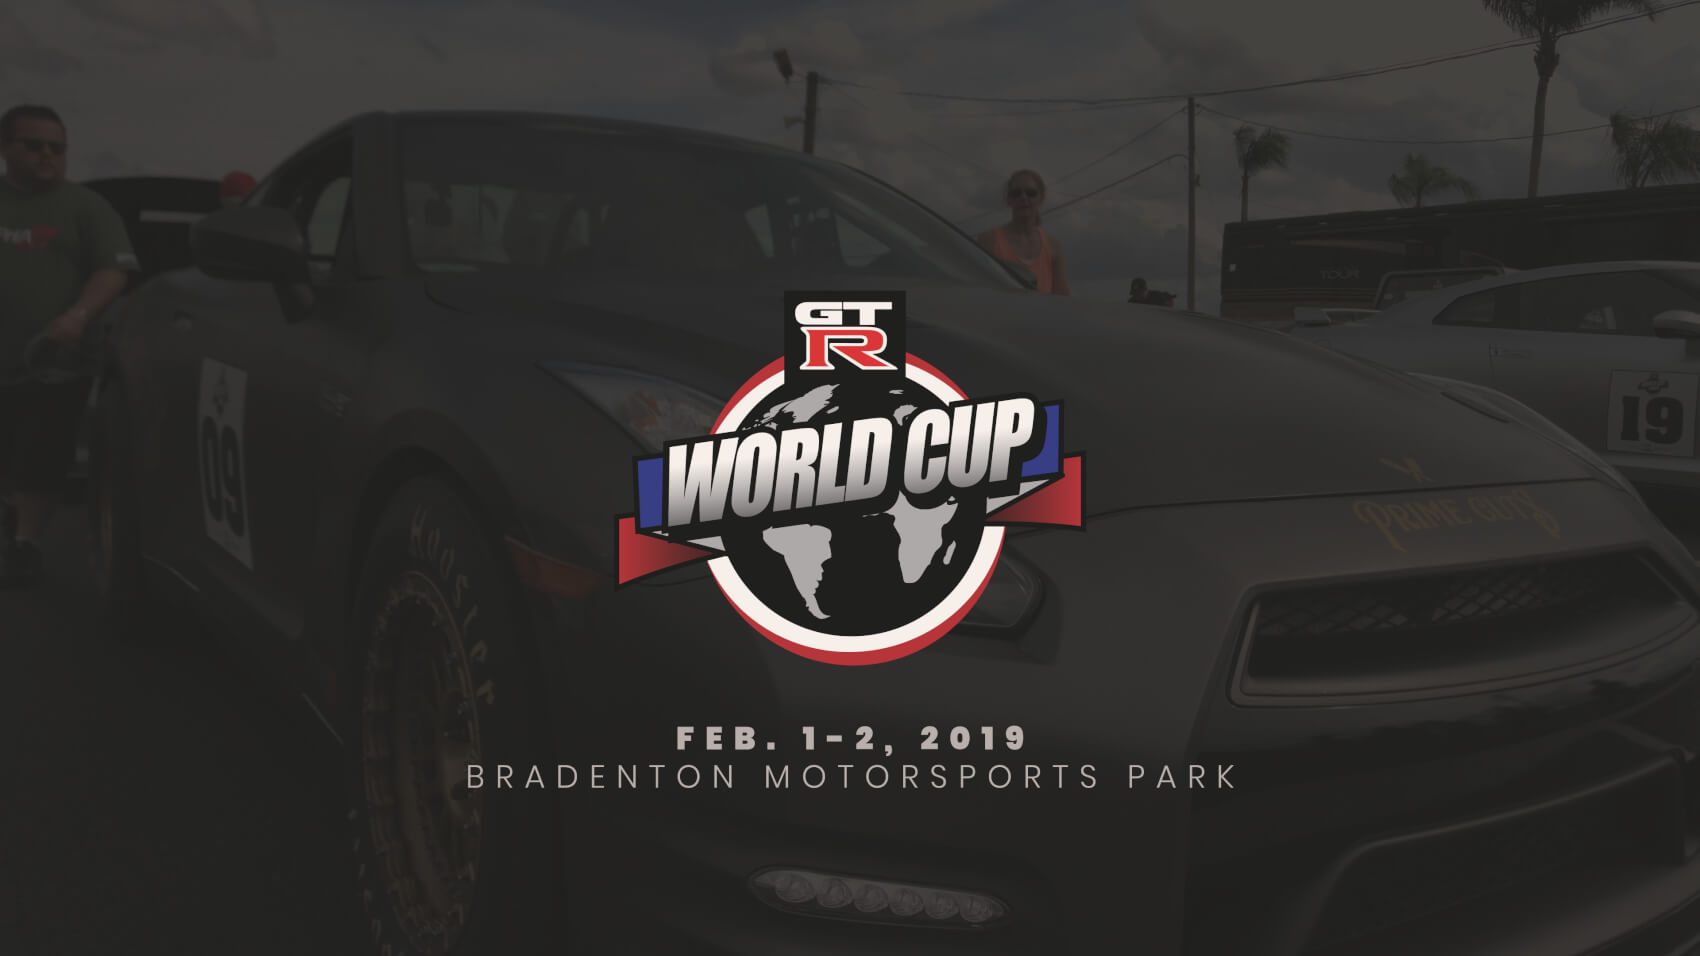 GT-R World Cup